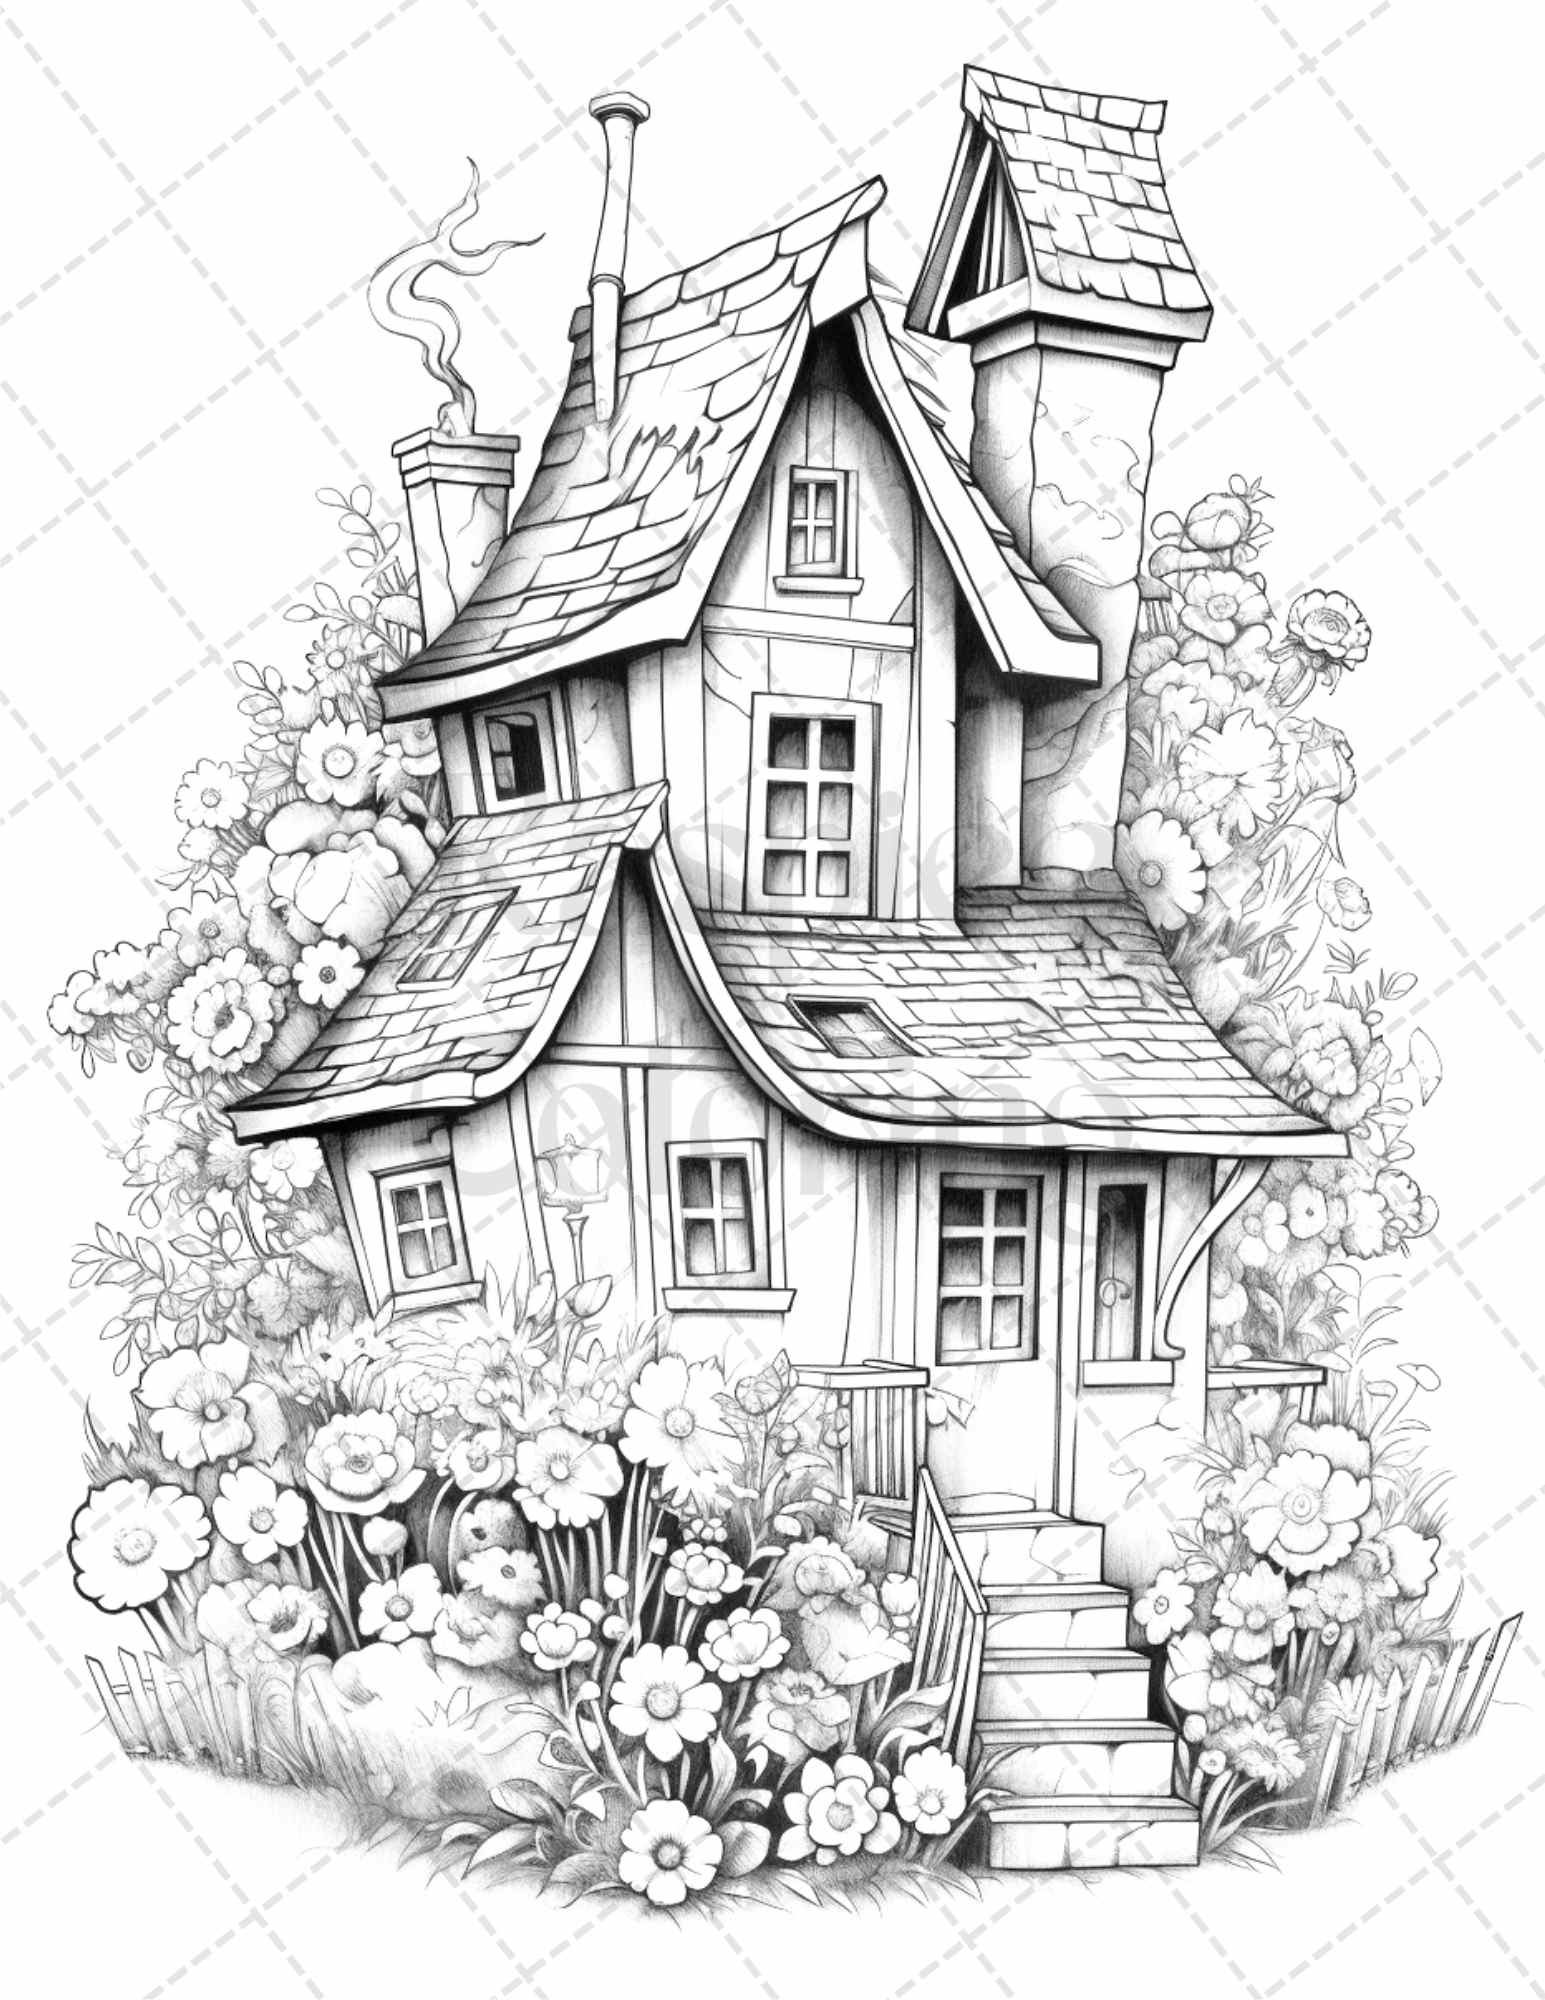 60 Flower Houses Grayscale Coloring Pages Printable for Adults, PDF File Instant Download - raspiee